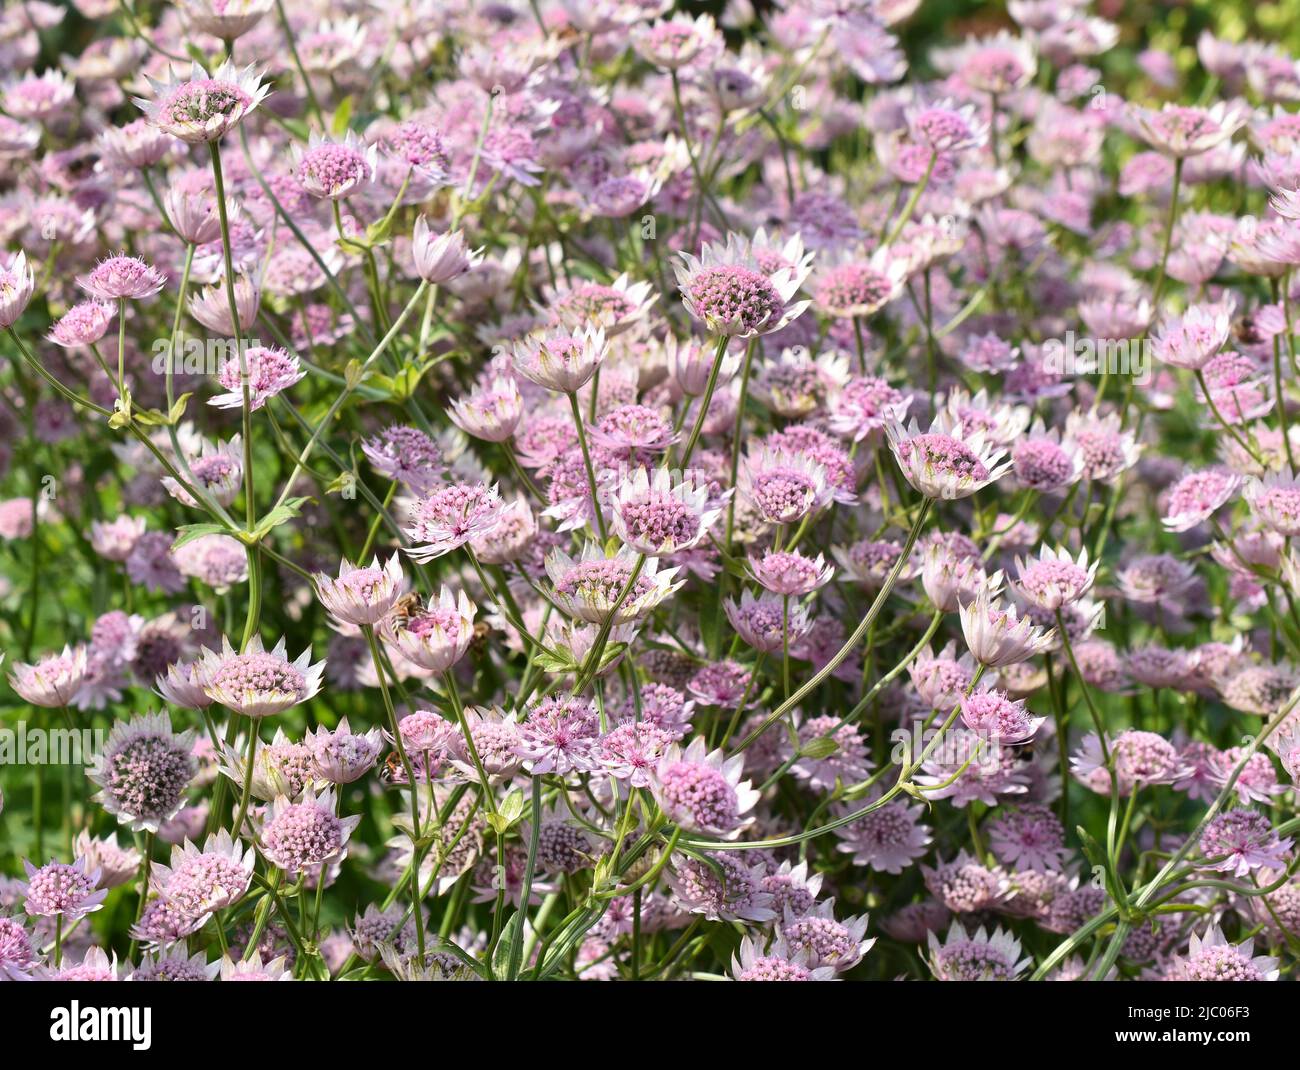 Pink great masterwort Astrantia major flowering in a park a summer day Stock Photo